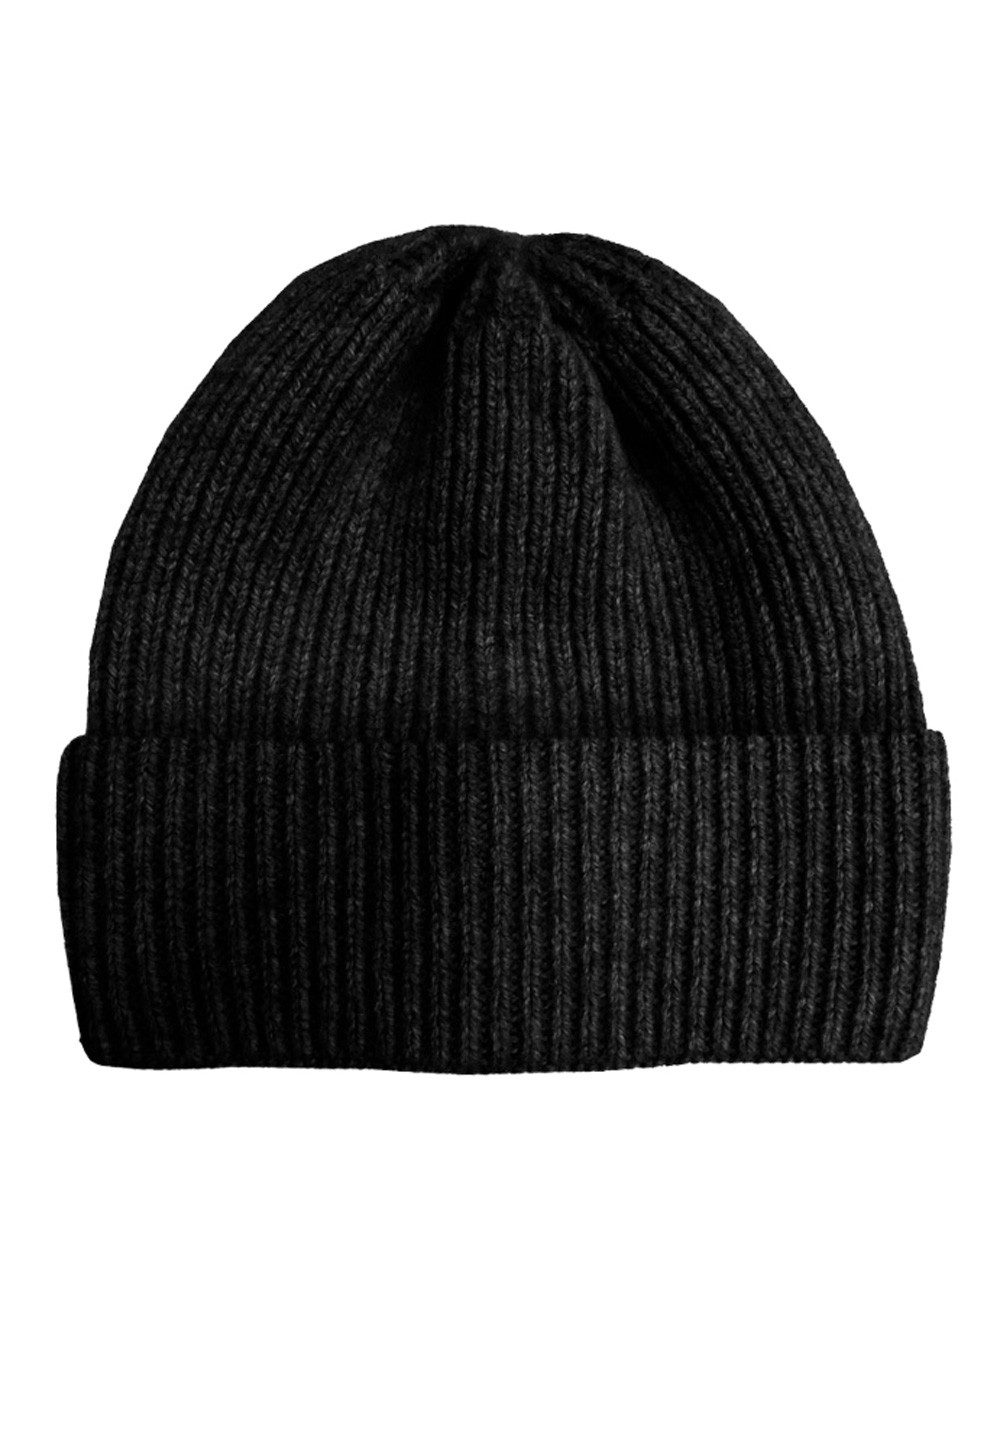 turn CAPO-DOUX in black Strickmütze ribbed, up Kaschmi CAP CAPO cap, Europe Made knitted